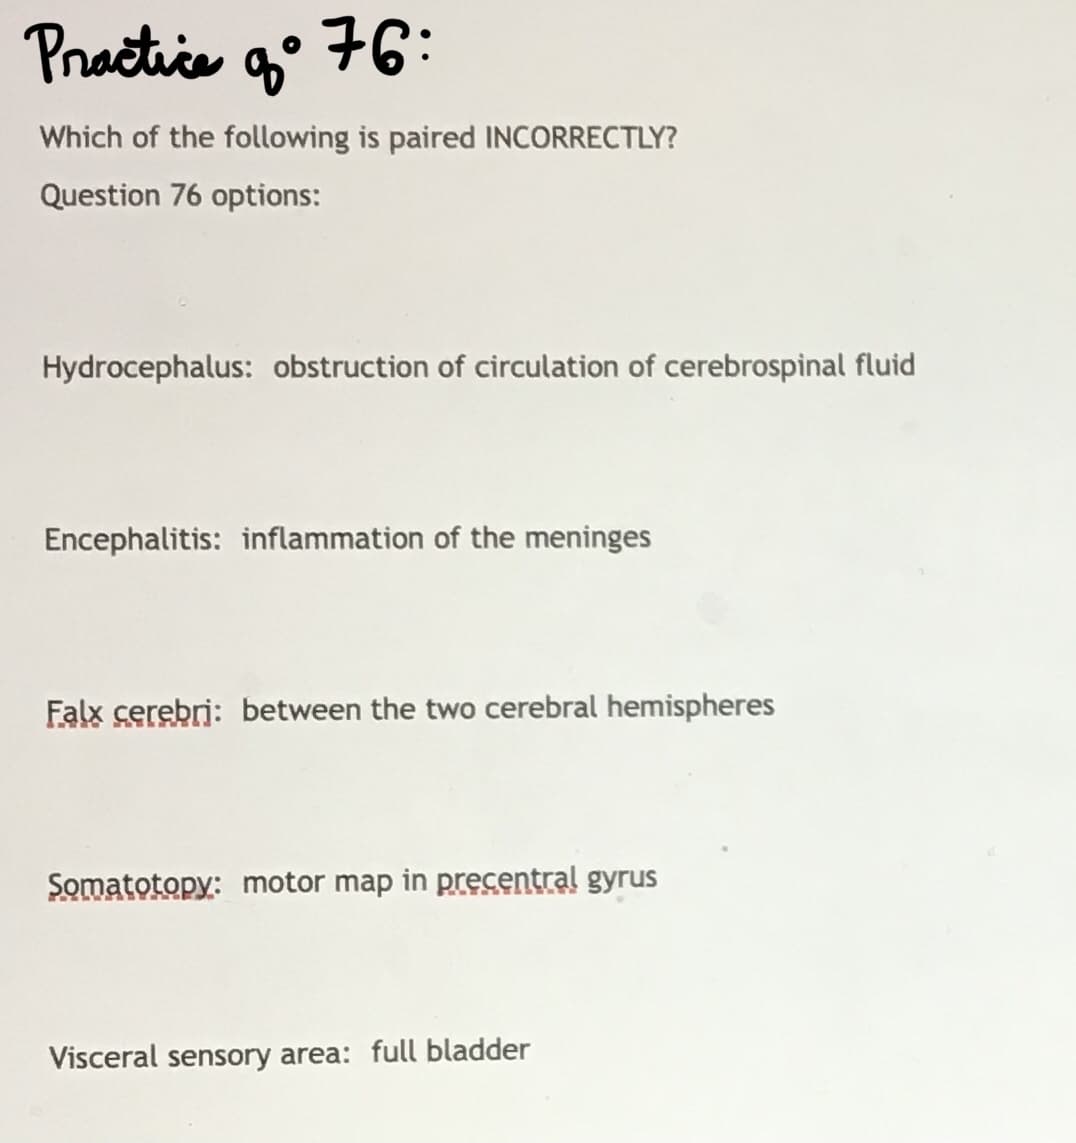 Practice
g° 76:
Which of the following is paired INCORRECTLY?
Question 76 options:
Hydrocephalus: obstruction of circulation of cerebrospinal fluid
Encephalitis: inflammation of the meninges
Falx cerebri: between the two cerebral hemispheres
Somatotopy: motor map in precentral gyrus
Visceral sensory area: full bladder
